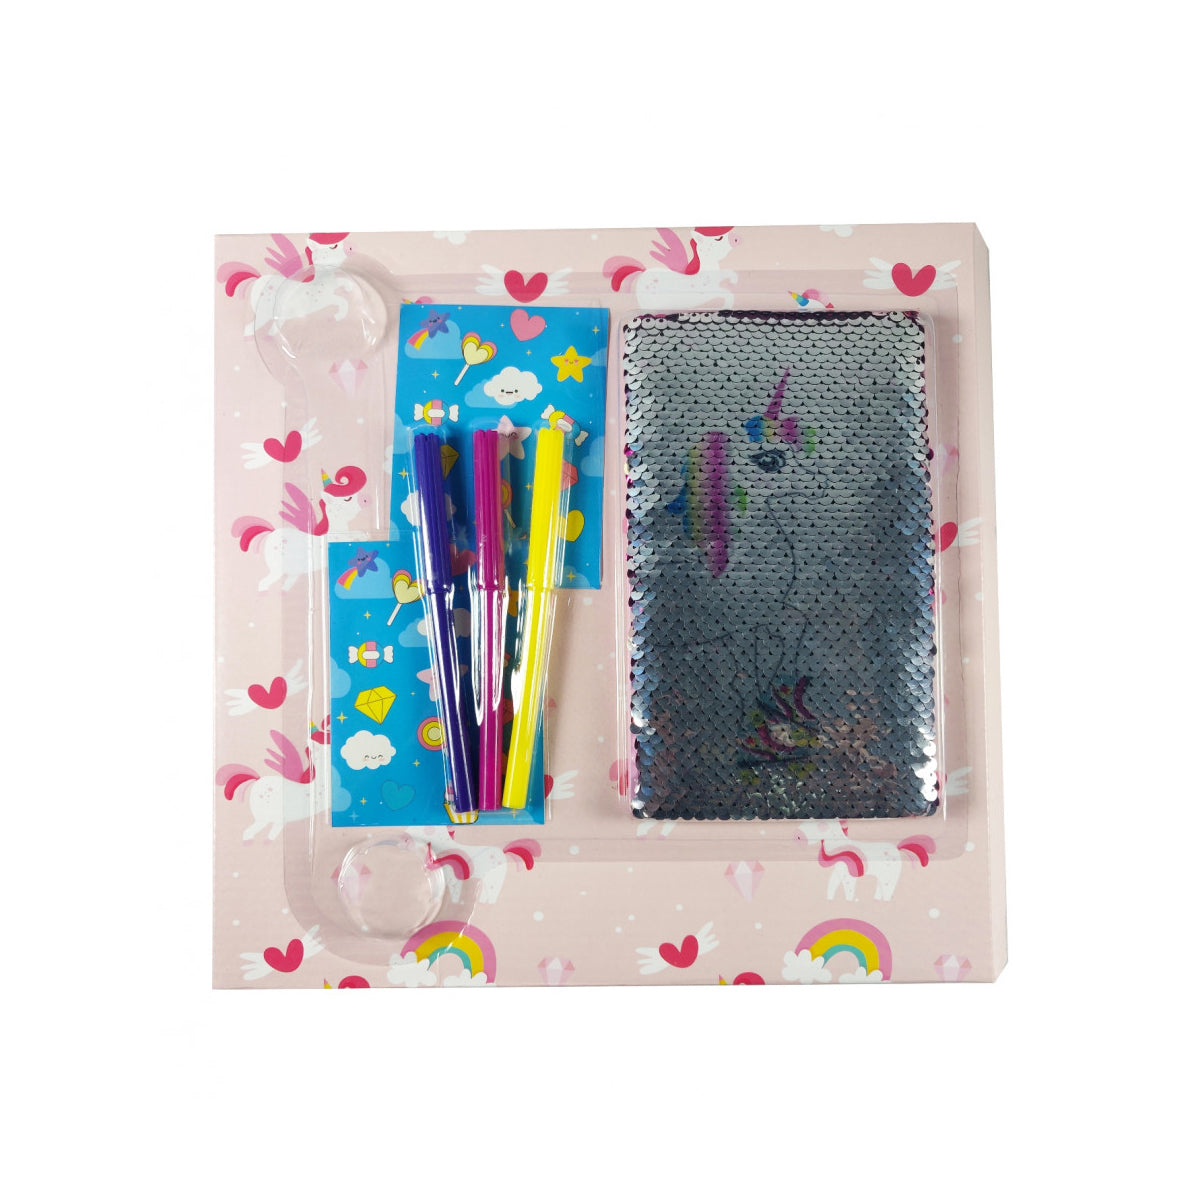 Sequins Diary Gift Set